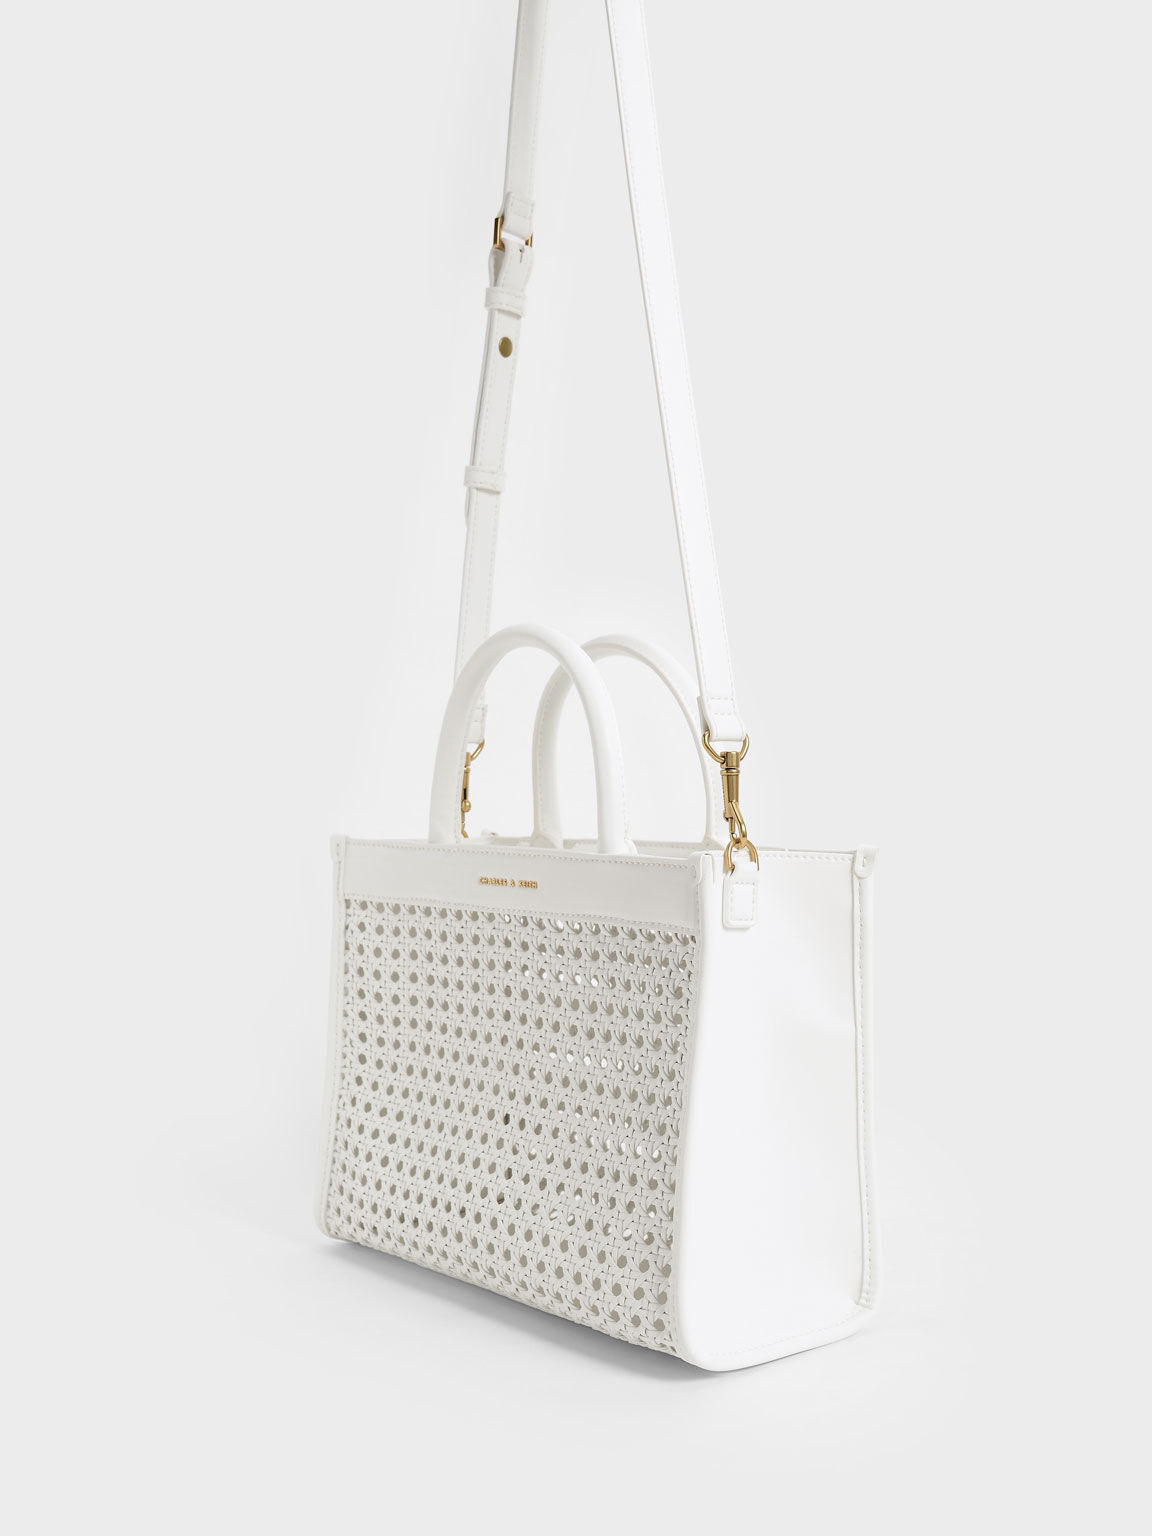 Woven Double Handle Tote Bag, White, hi-res